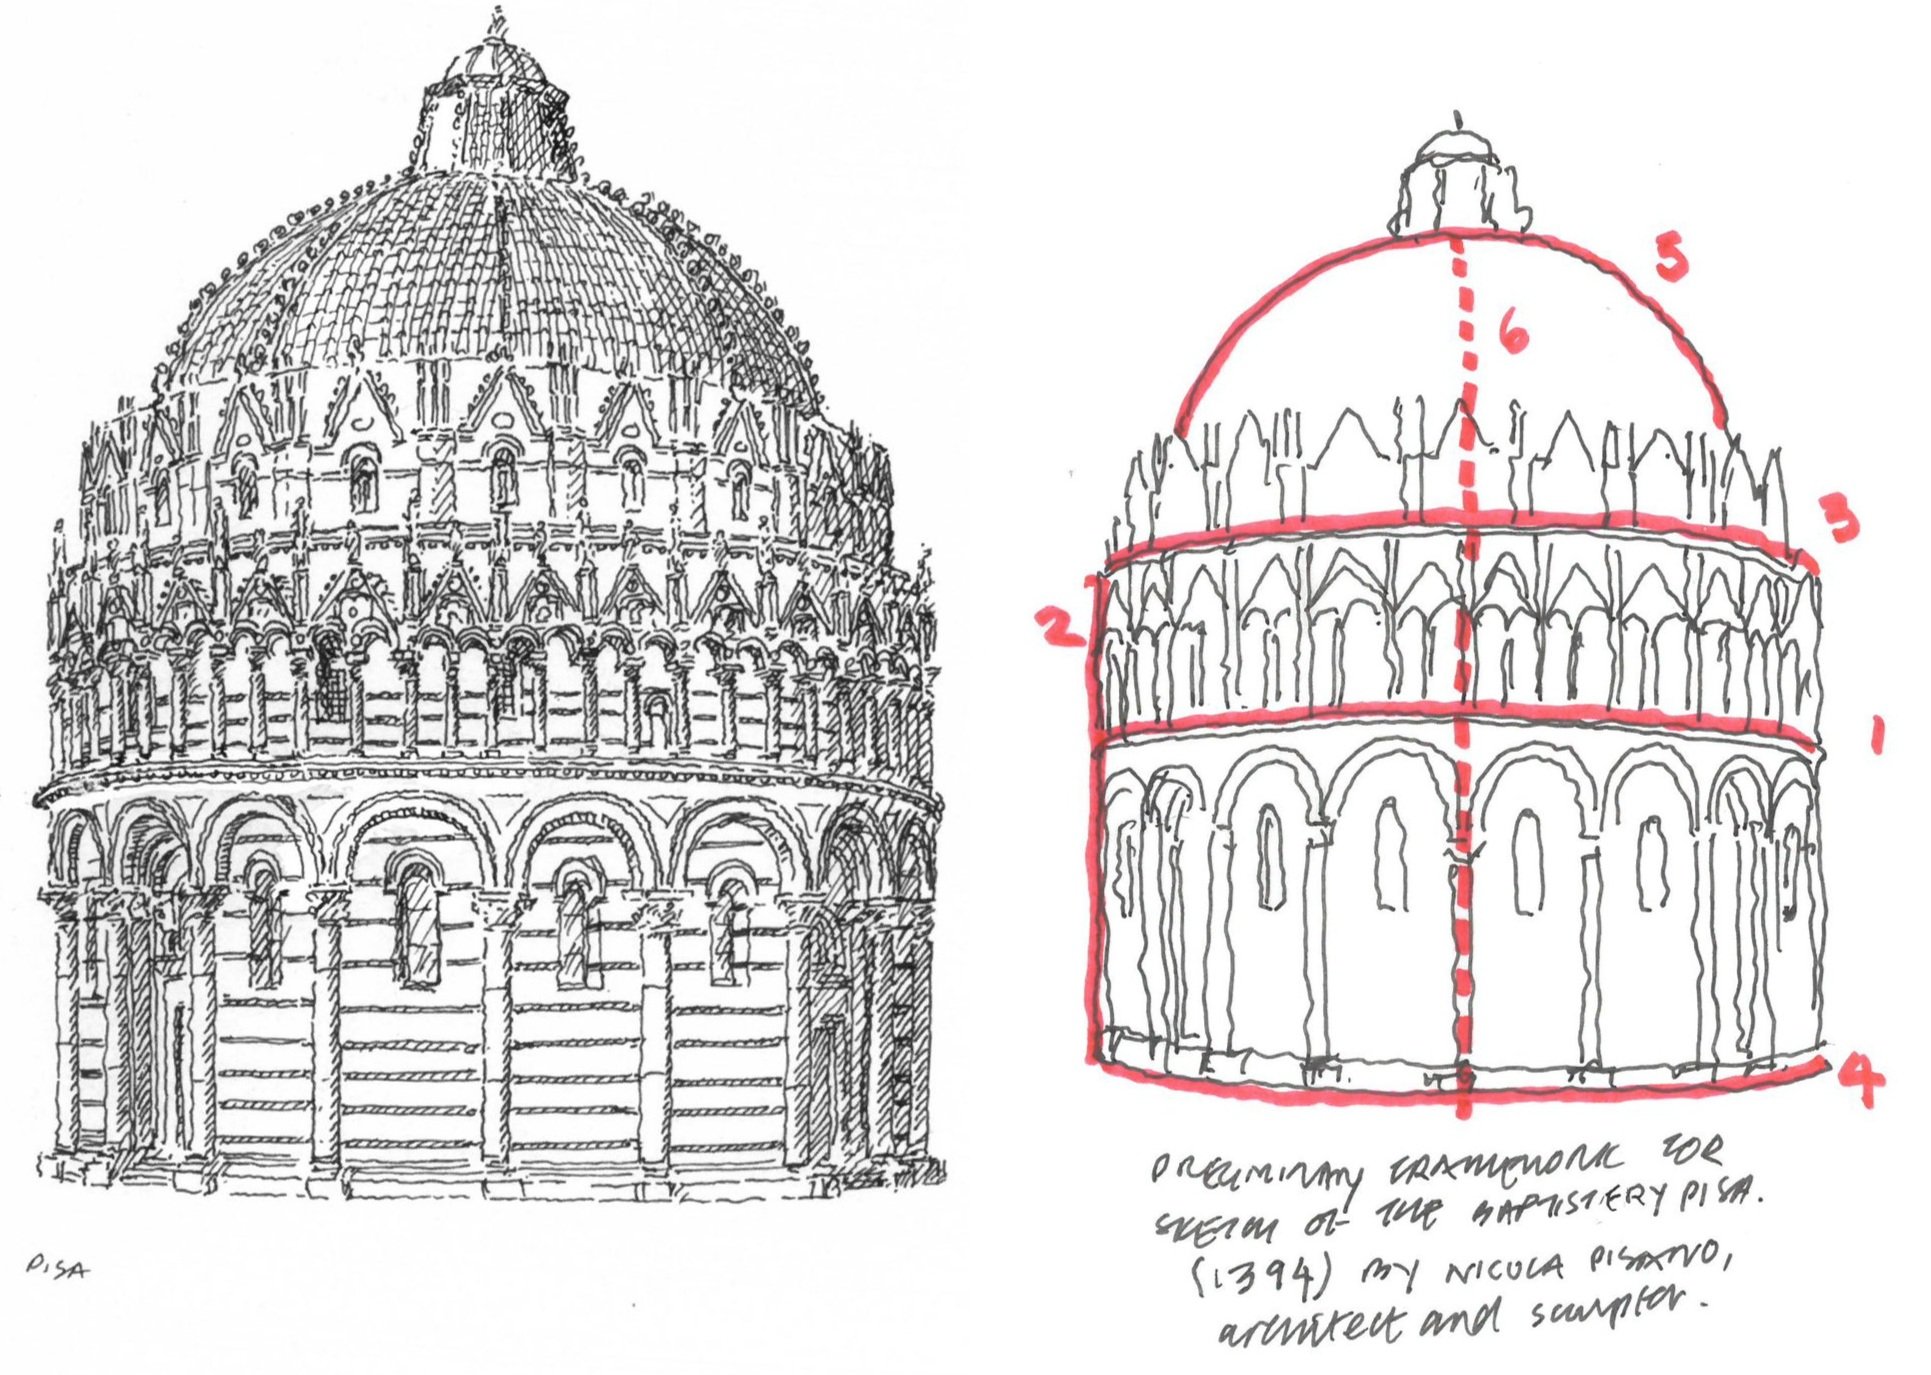 Introduction to architectural drawing and model making